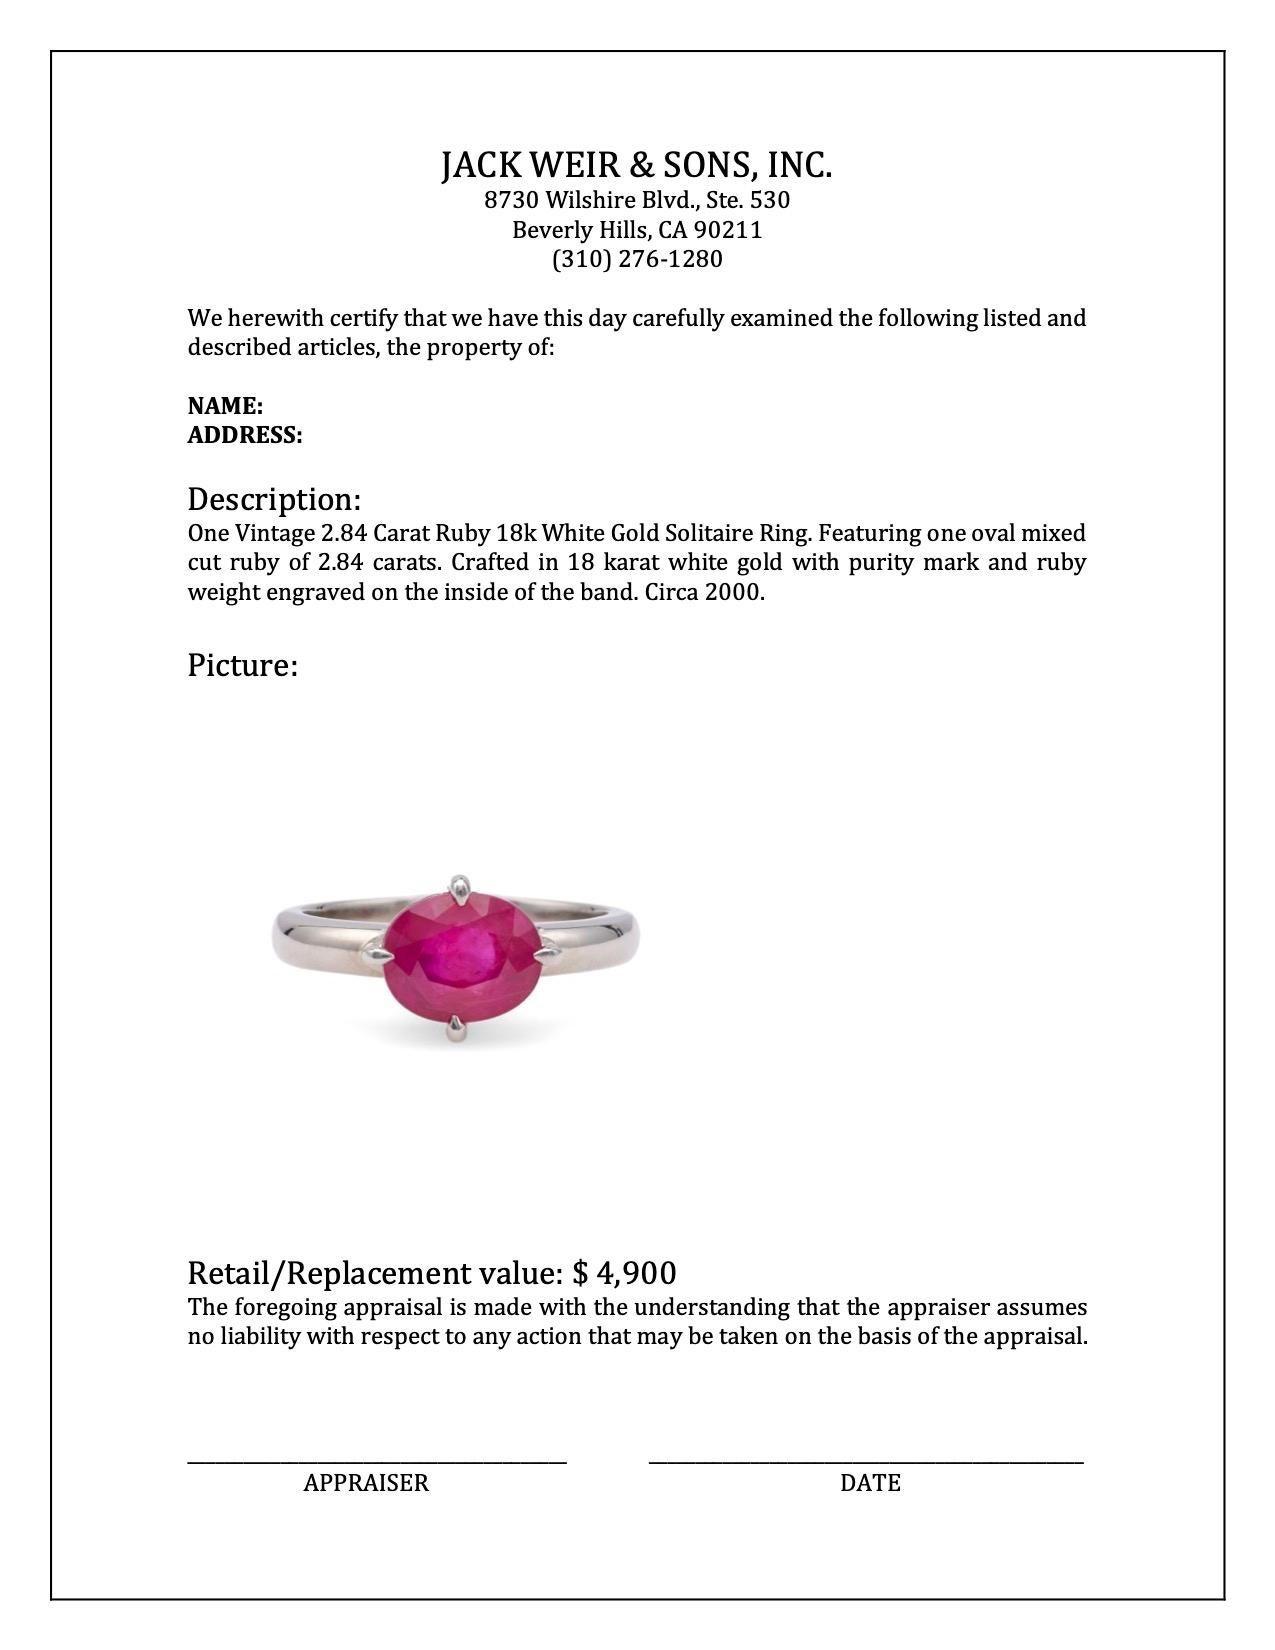 Women's or Men's Vintage 2.84 Carat Ruby 18k White Gold Solitaire Ring For Sale